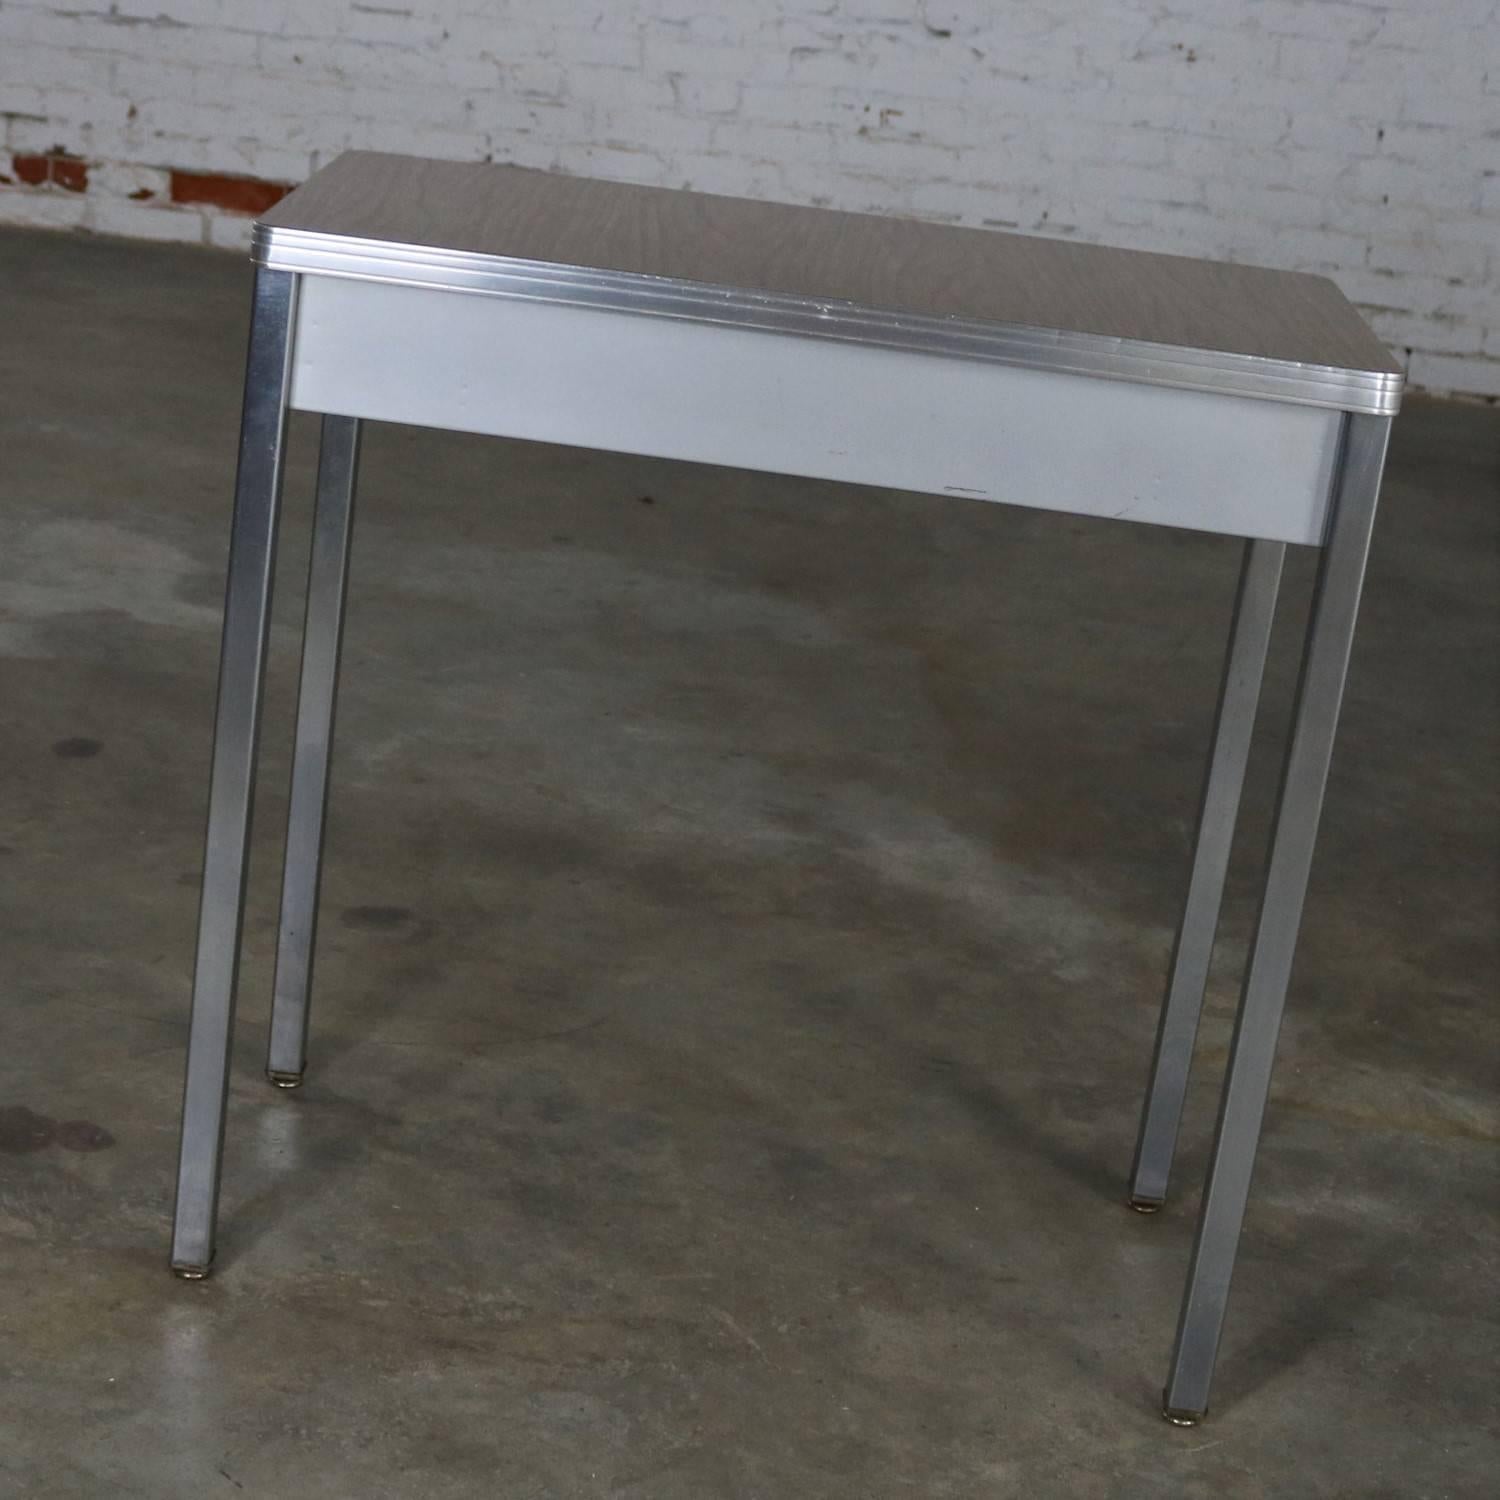 American Art Deco Machine Age Streamline Moderne Table Desk by Royal Metal Manufacturing